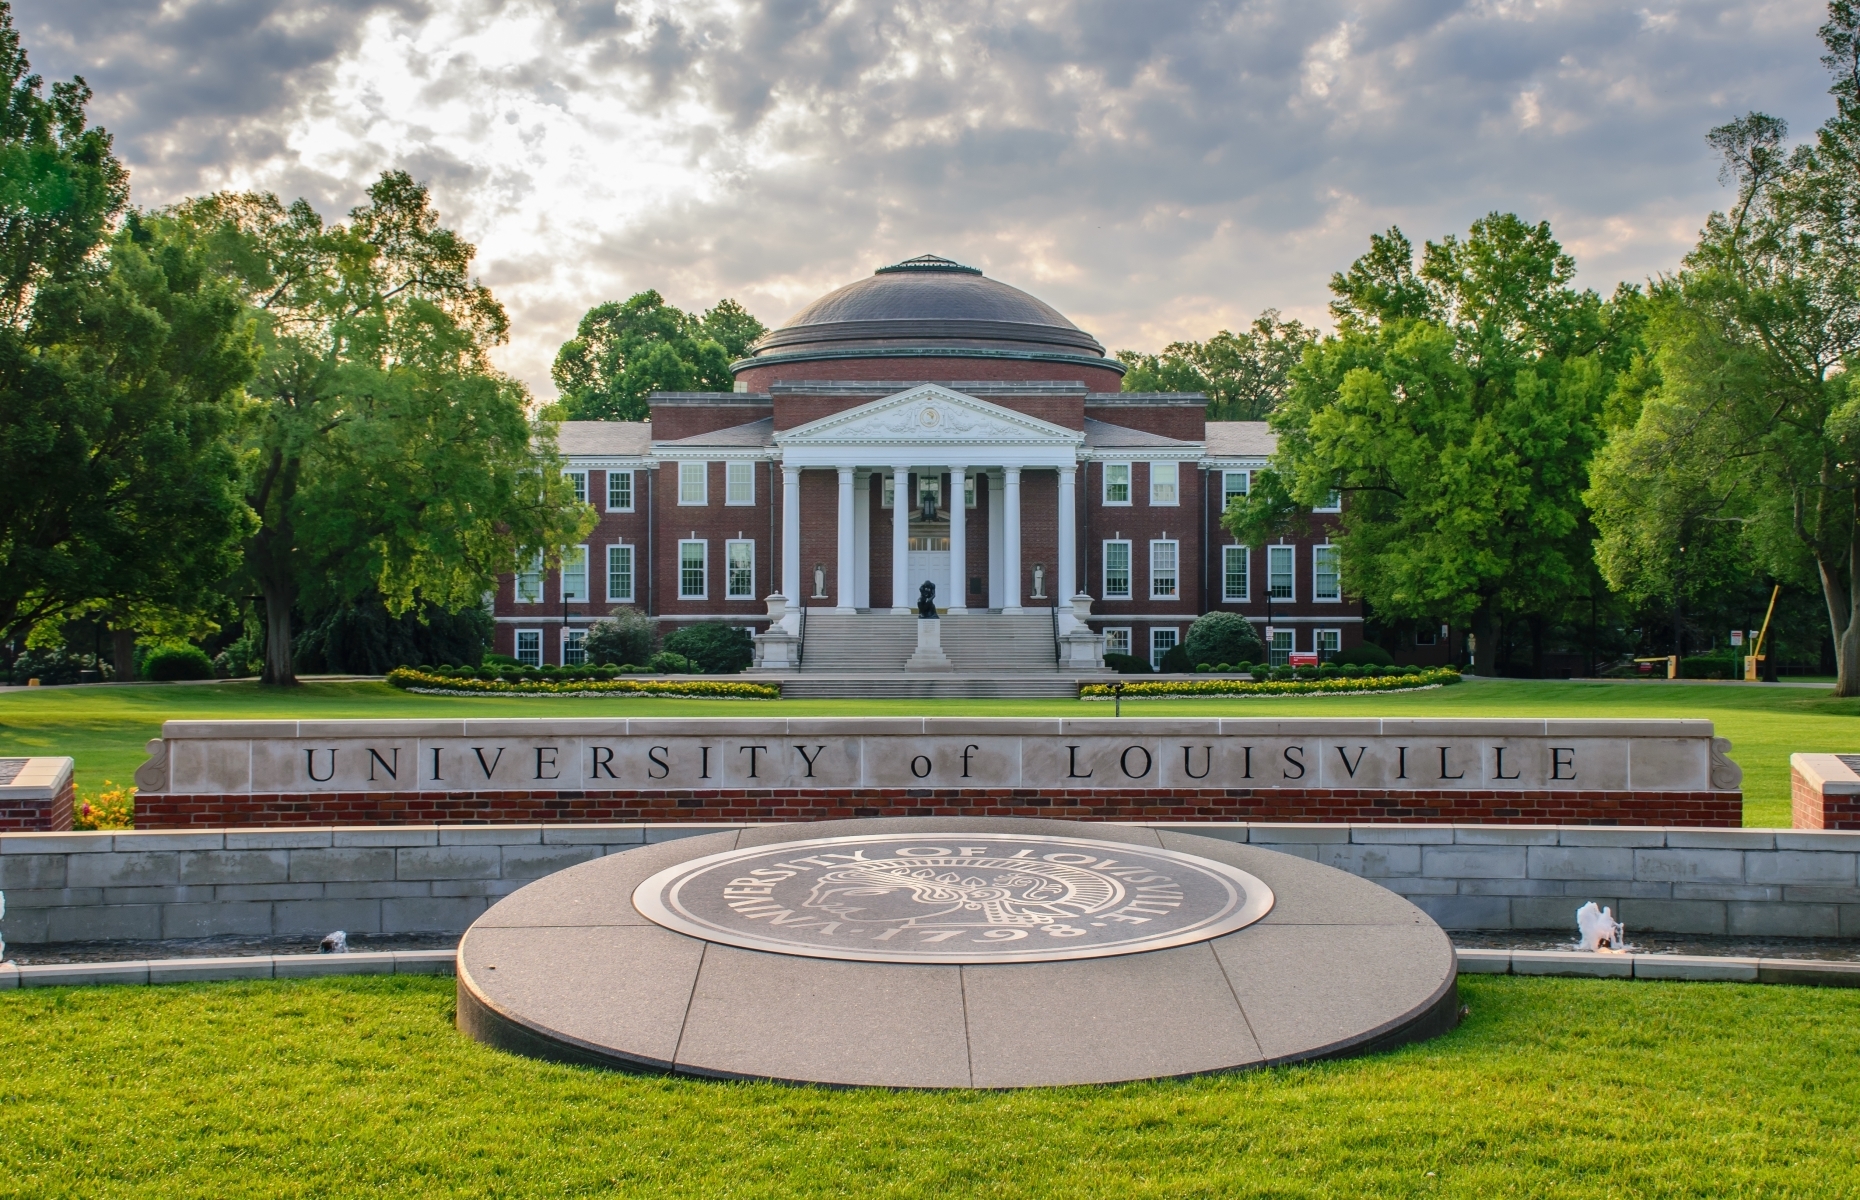 <p>The <a href="http://louisville.edu/" rel="noreferrer noopener">University of Louisville</a>’s 287-acre Belknap campus, just south of downtown Louisville, scores points for its stately buildings and community garden.</p>